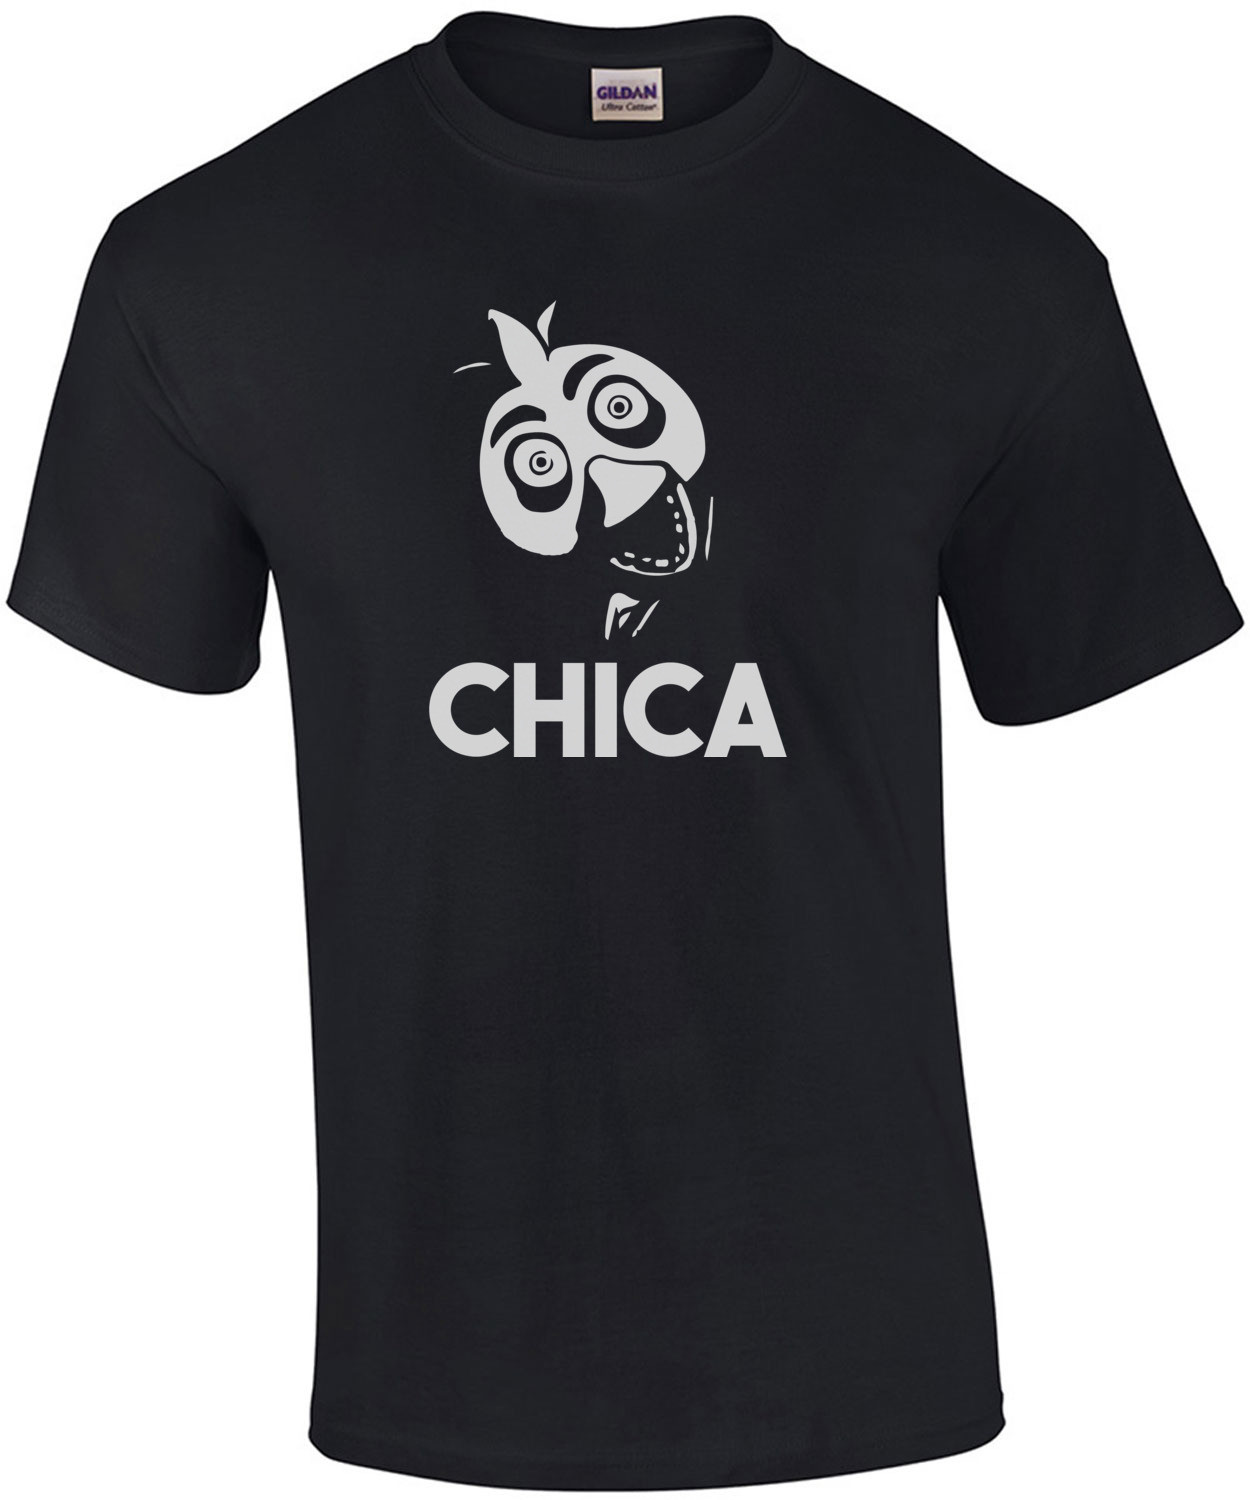 Chica Five Nights At Freddy's t shirt